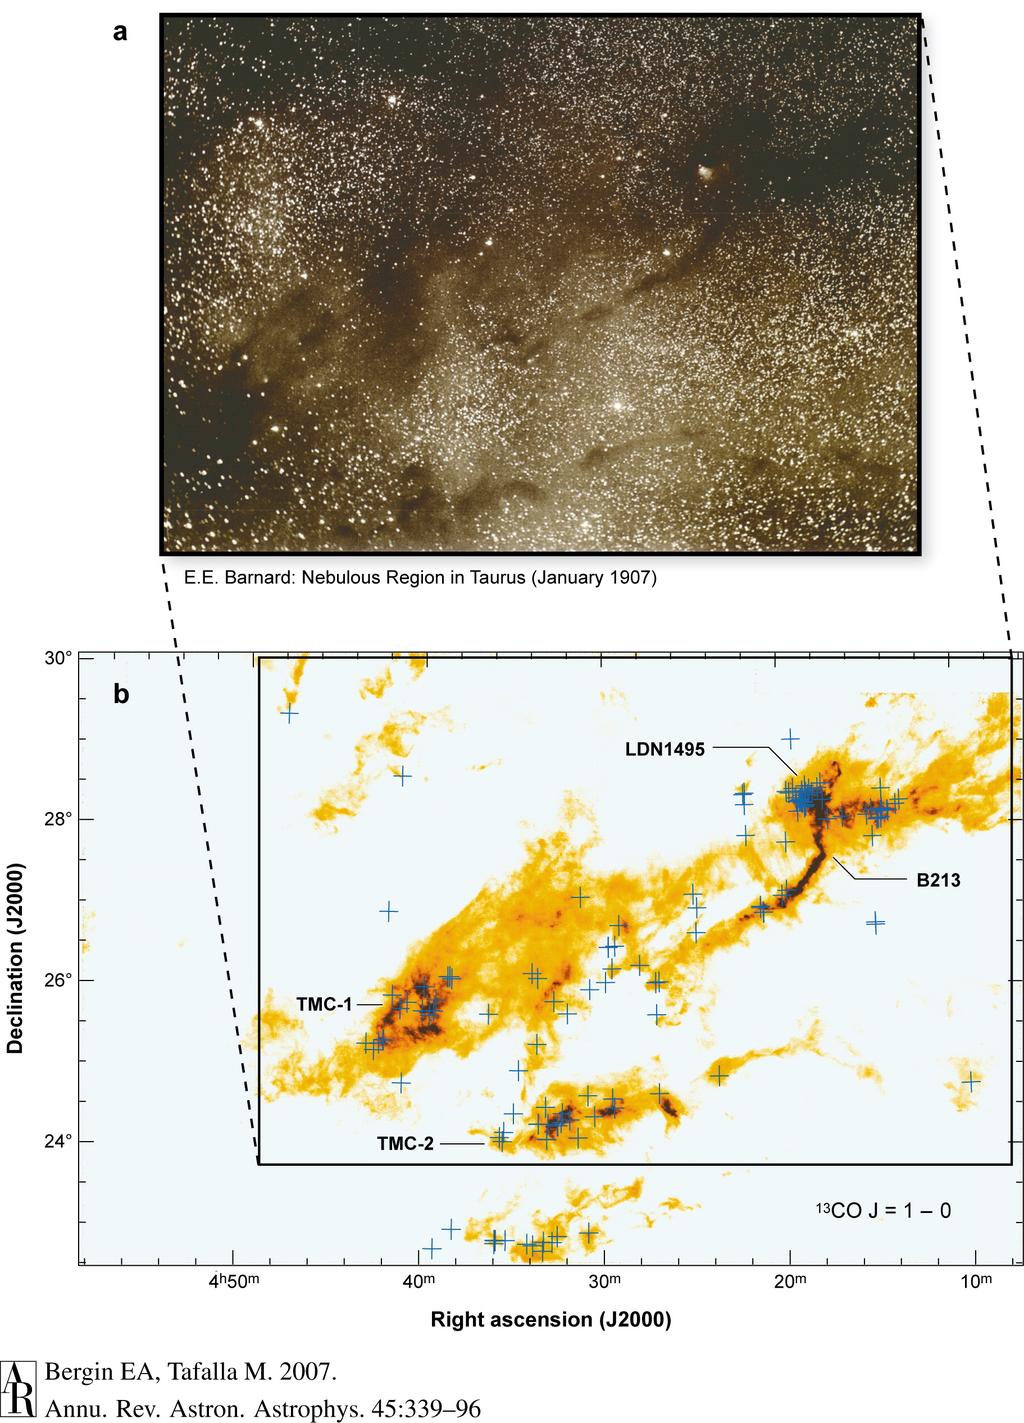 Molecular Cloud Complexes in the Milky Way: The Taurus Cloud 23,000 Solar Masses Crosses: young stars and protostars